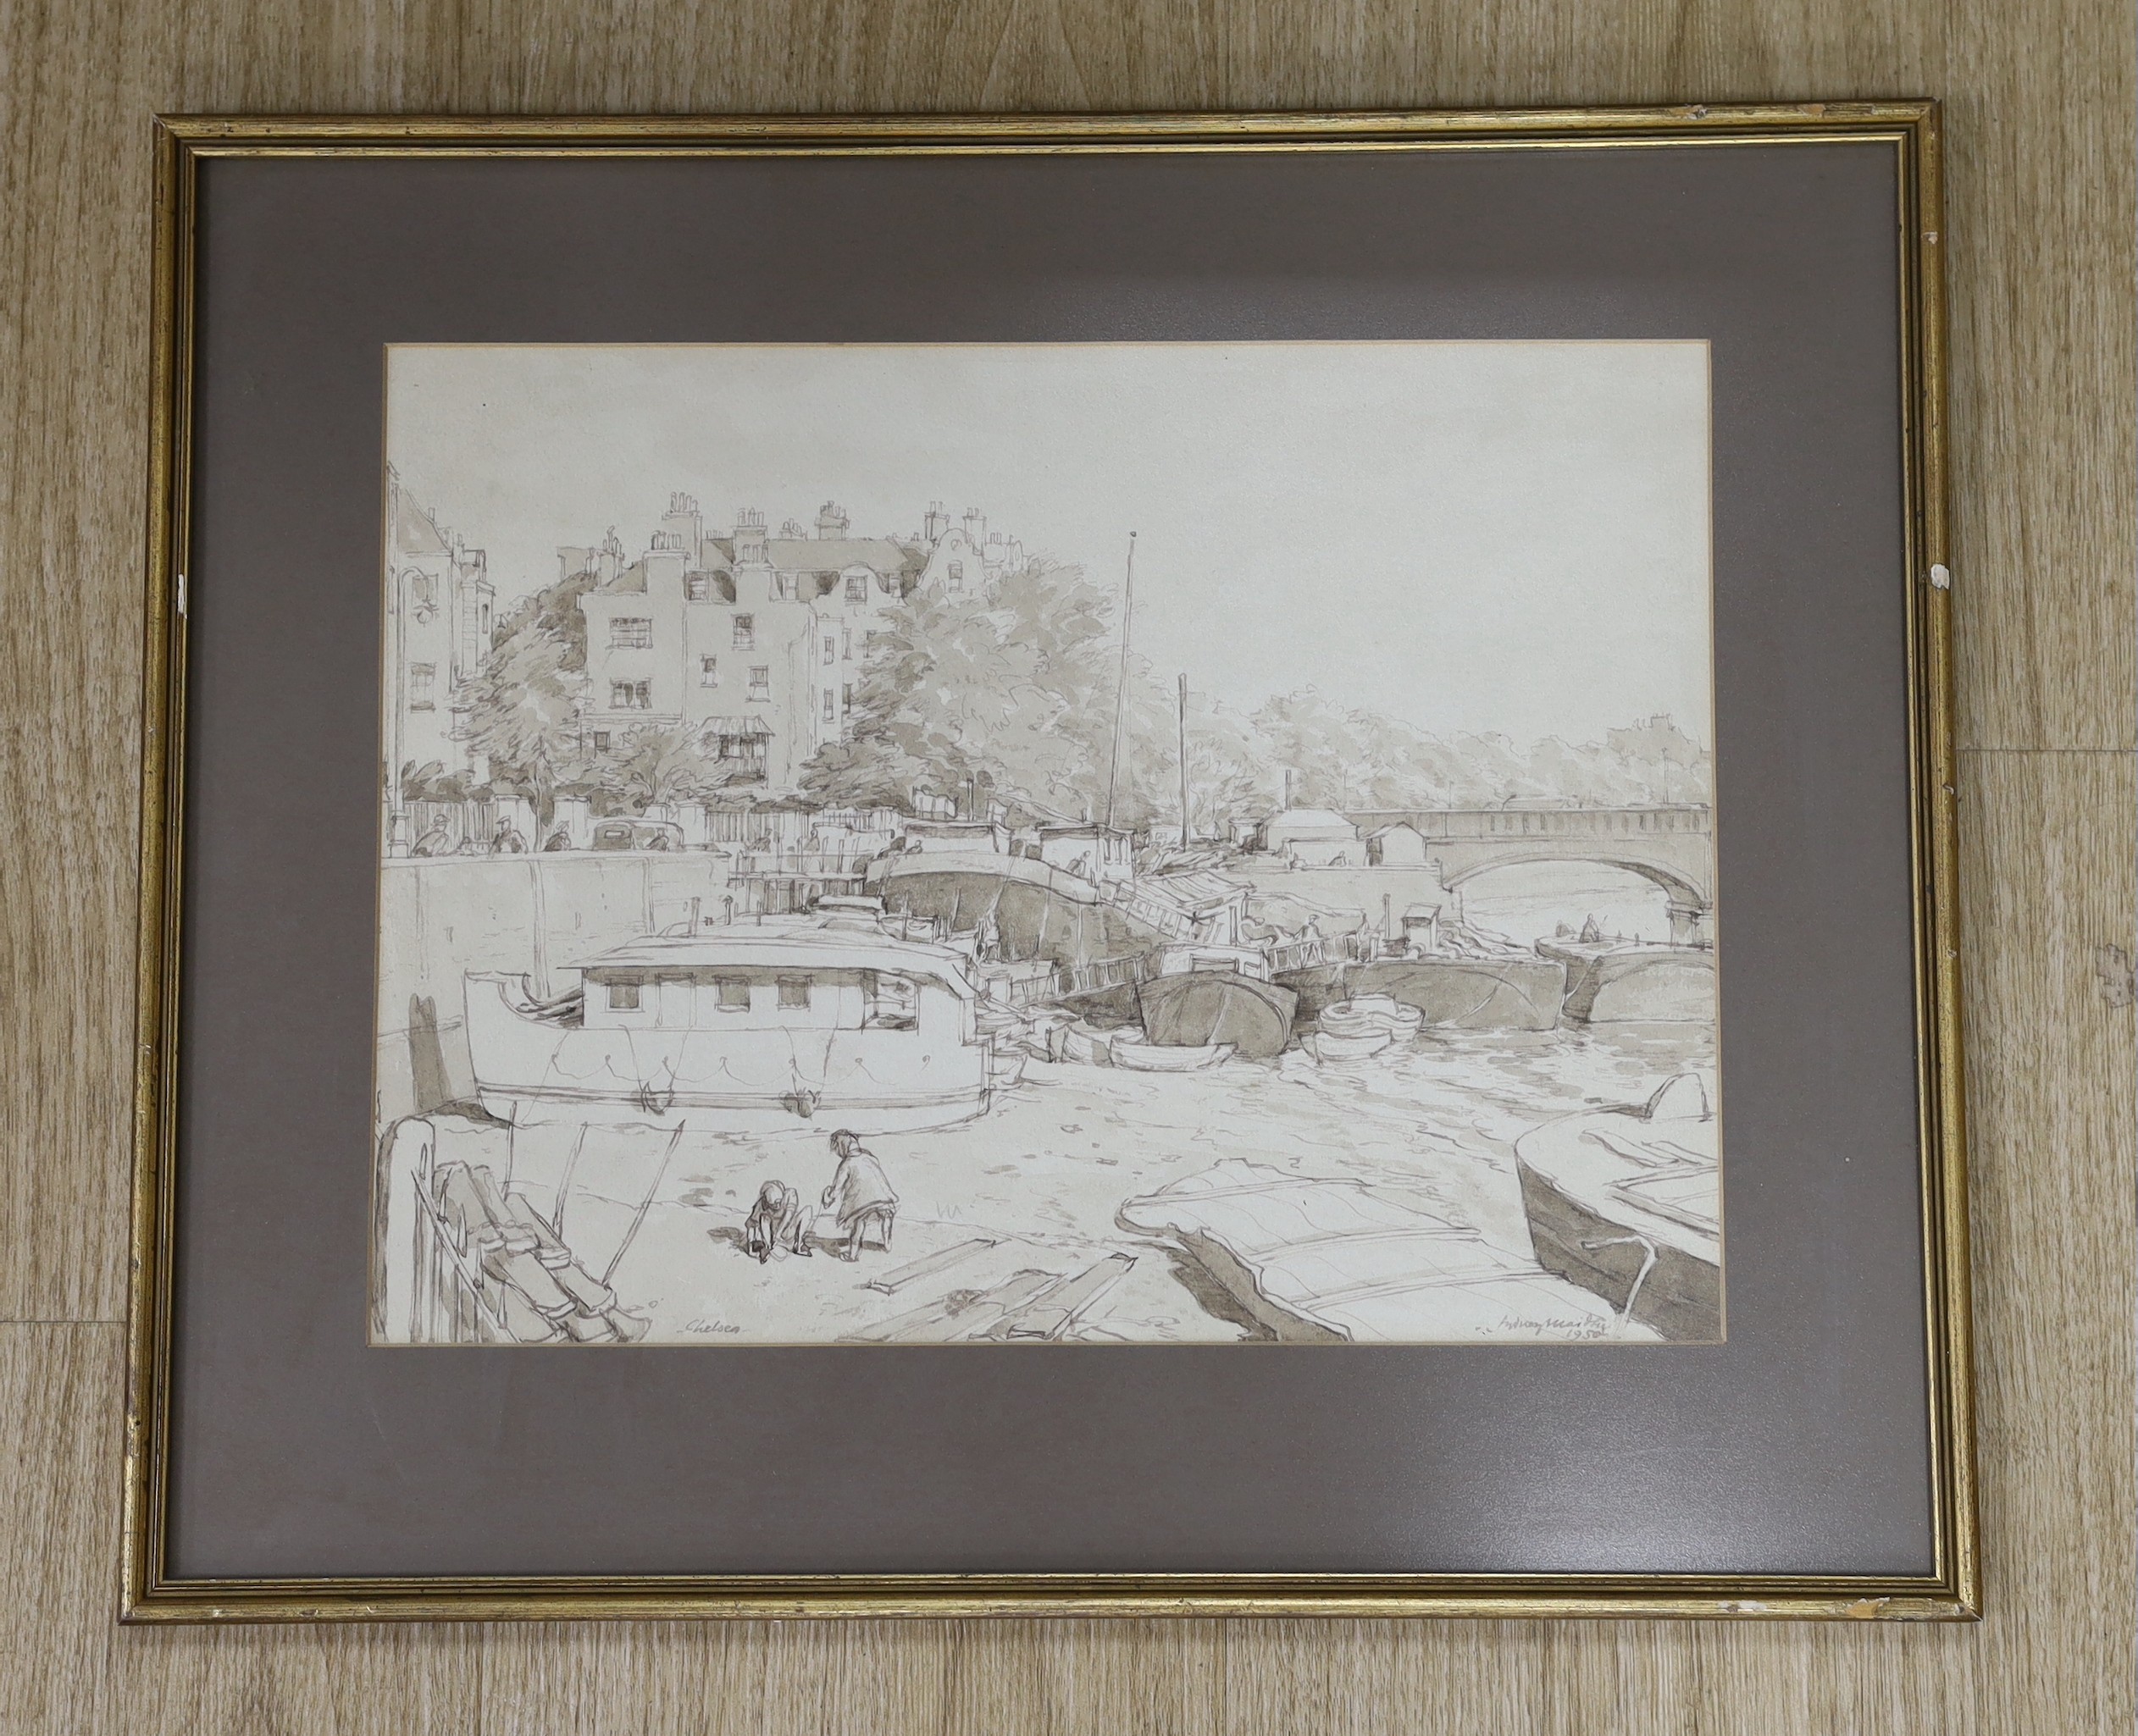 Sydney Maiden (1893-1963), monochrome watercolour, 'Cheyne Walk', signed and dated 1950, 24 x 33cm